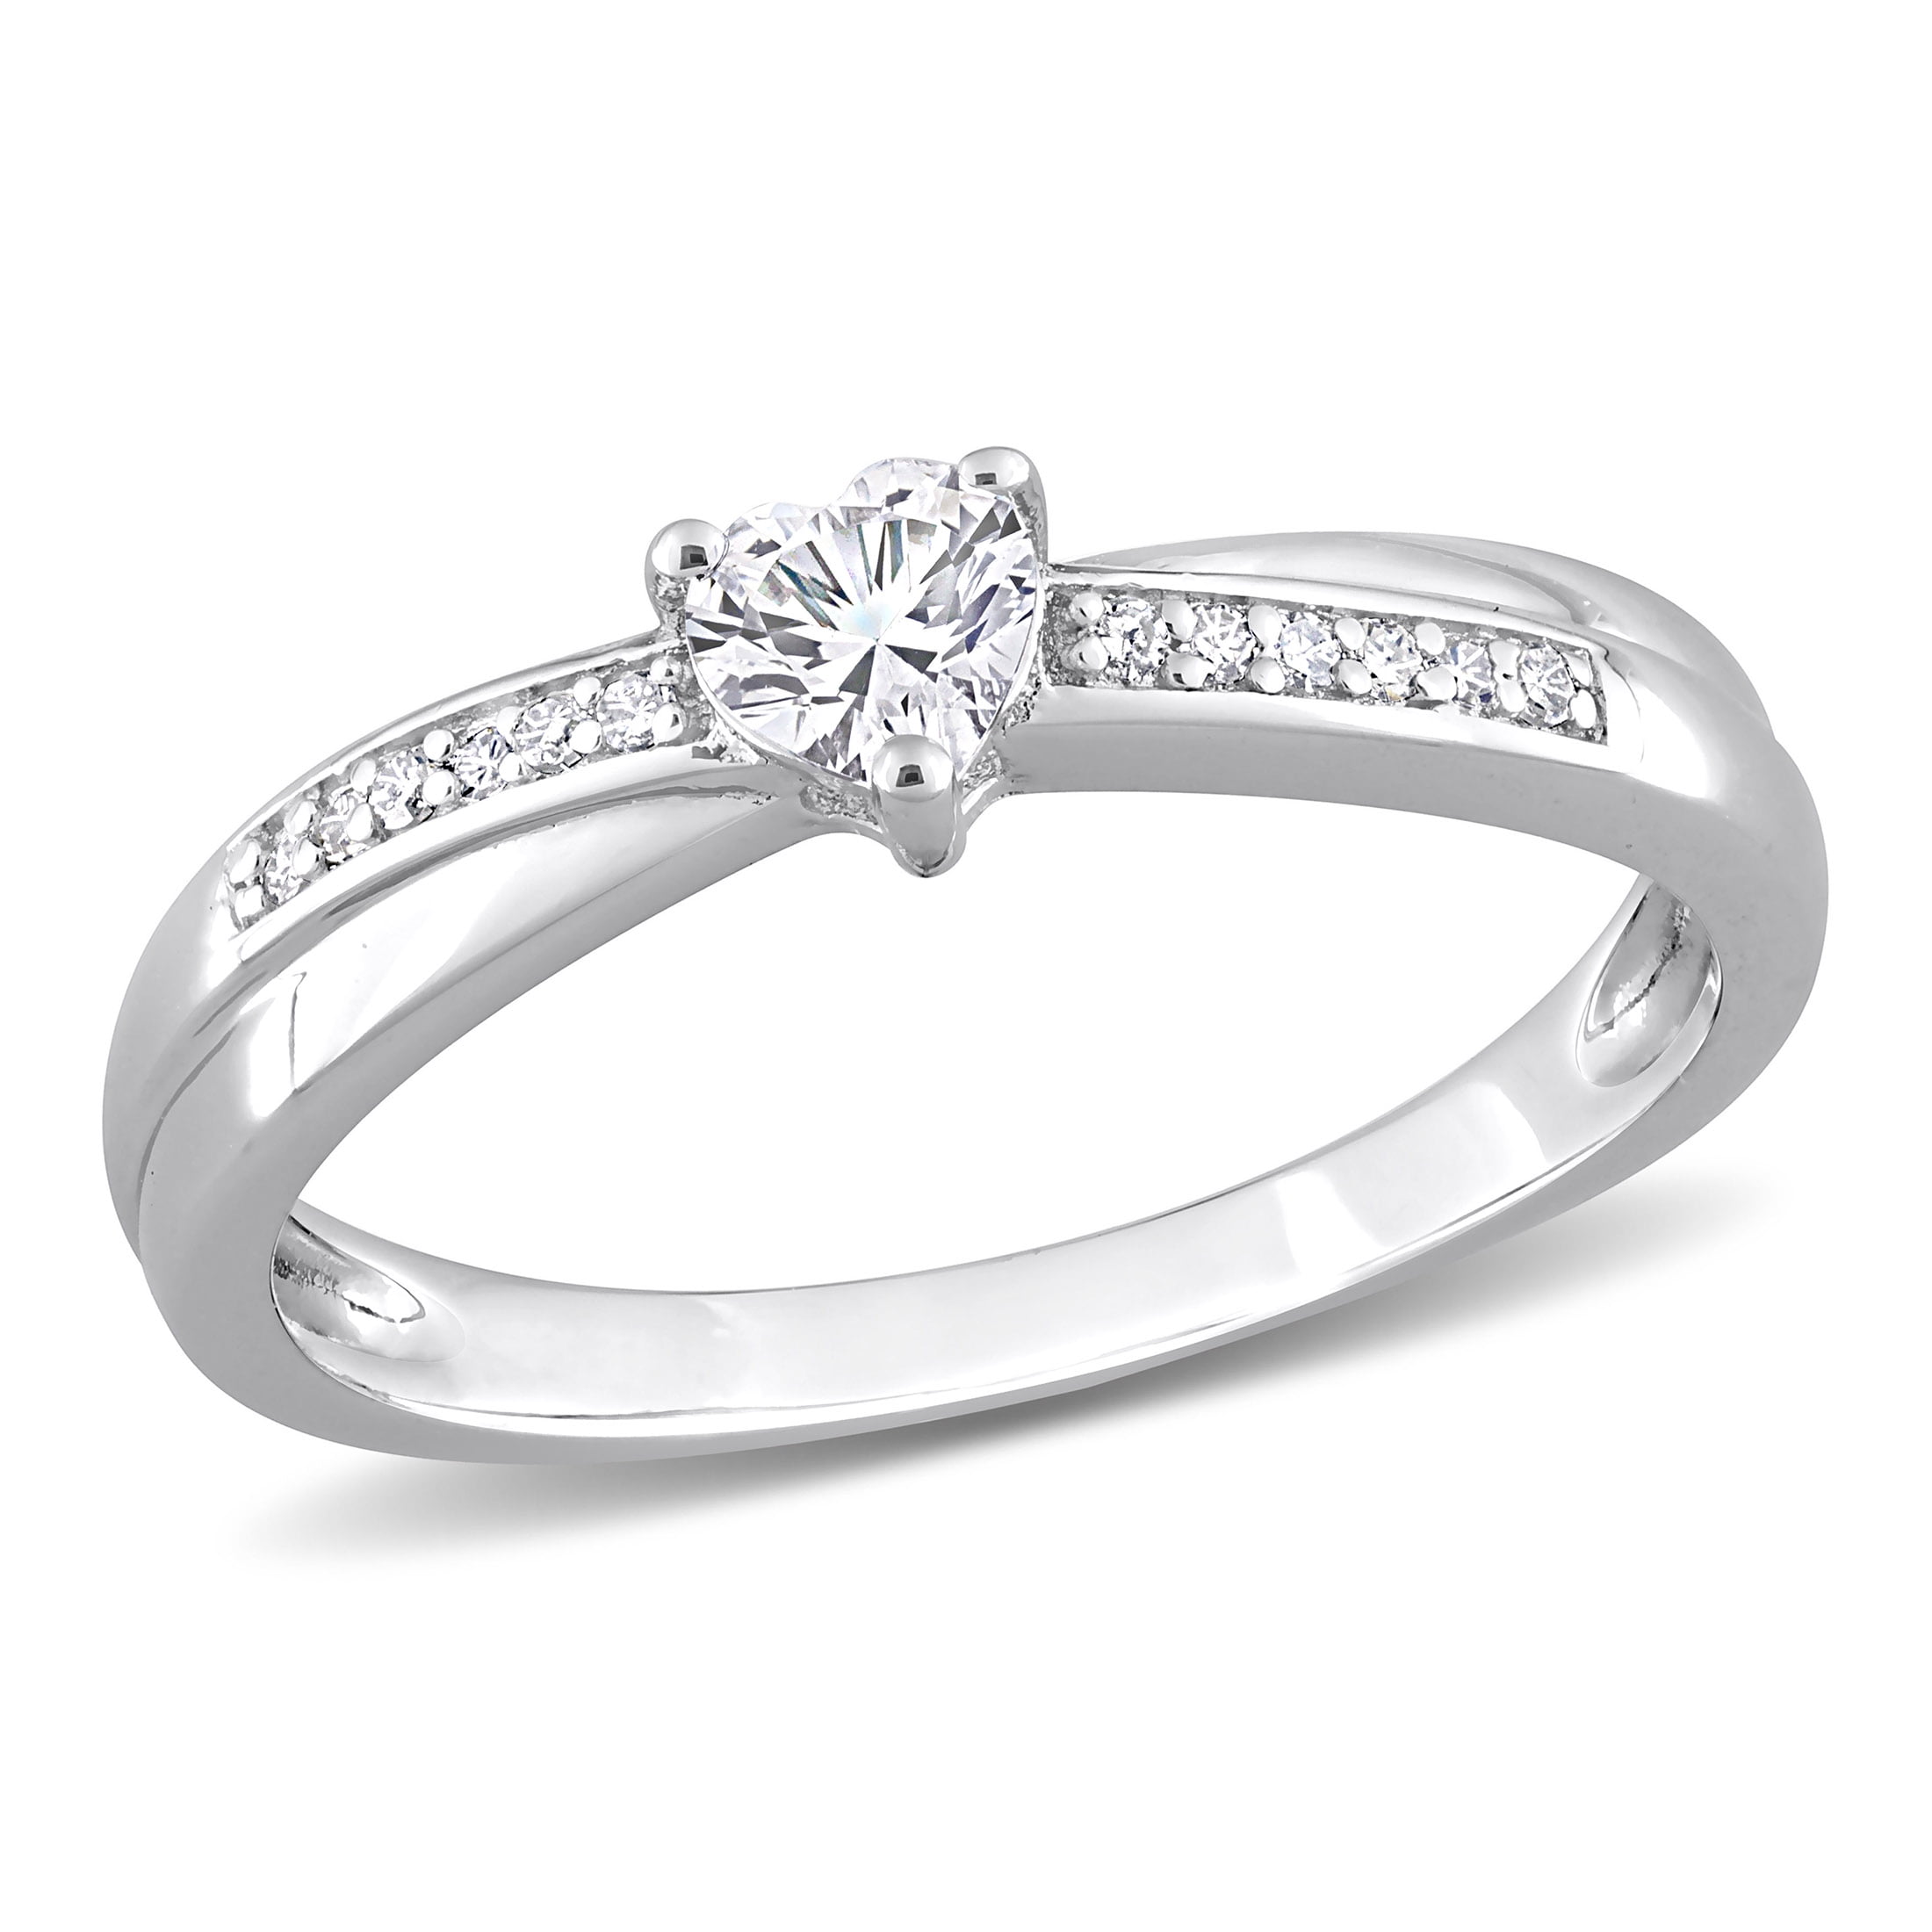 Miabella Women s 1 4 Carat T G W Created White Sapphire and Diamond Accent Heart Promise Ring in Sterling Silver 98af4769 01f3 4898 aadf c46beb085a73.08835f91dae7f20eba145ddd86d8b841